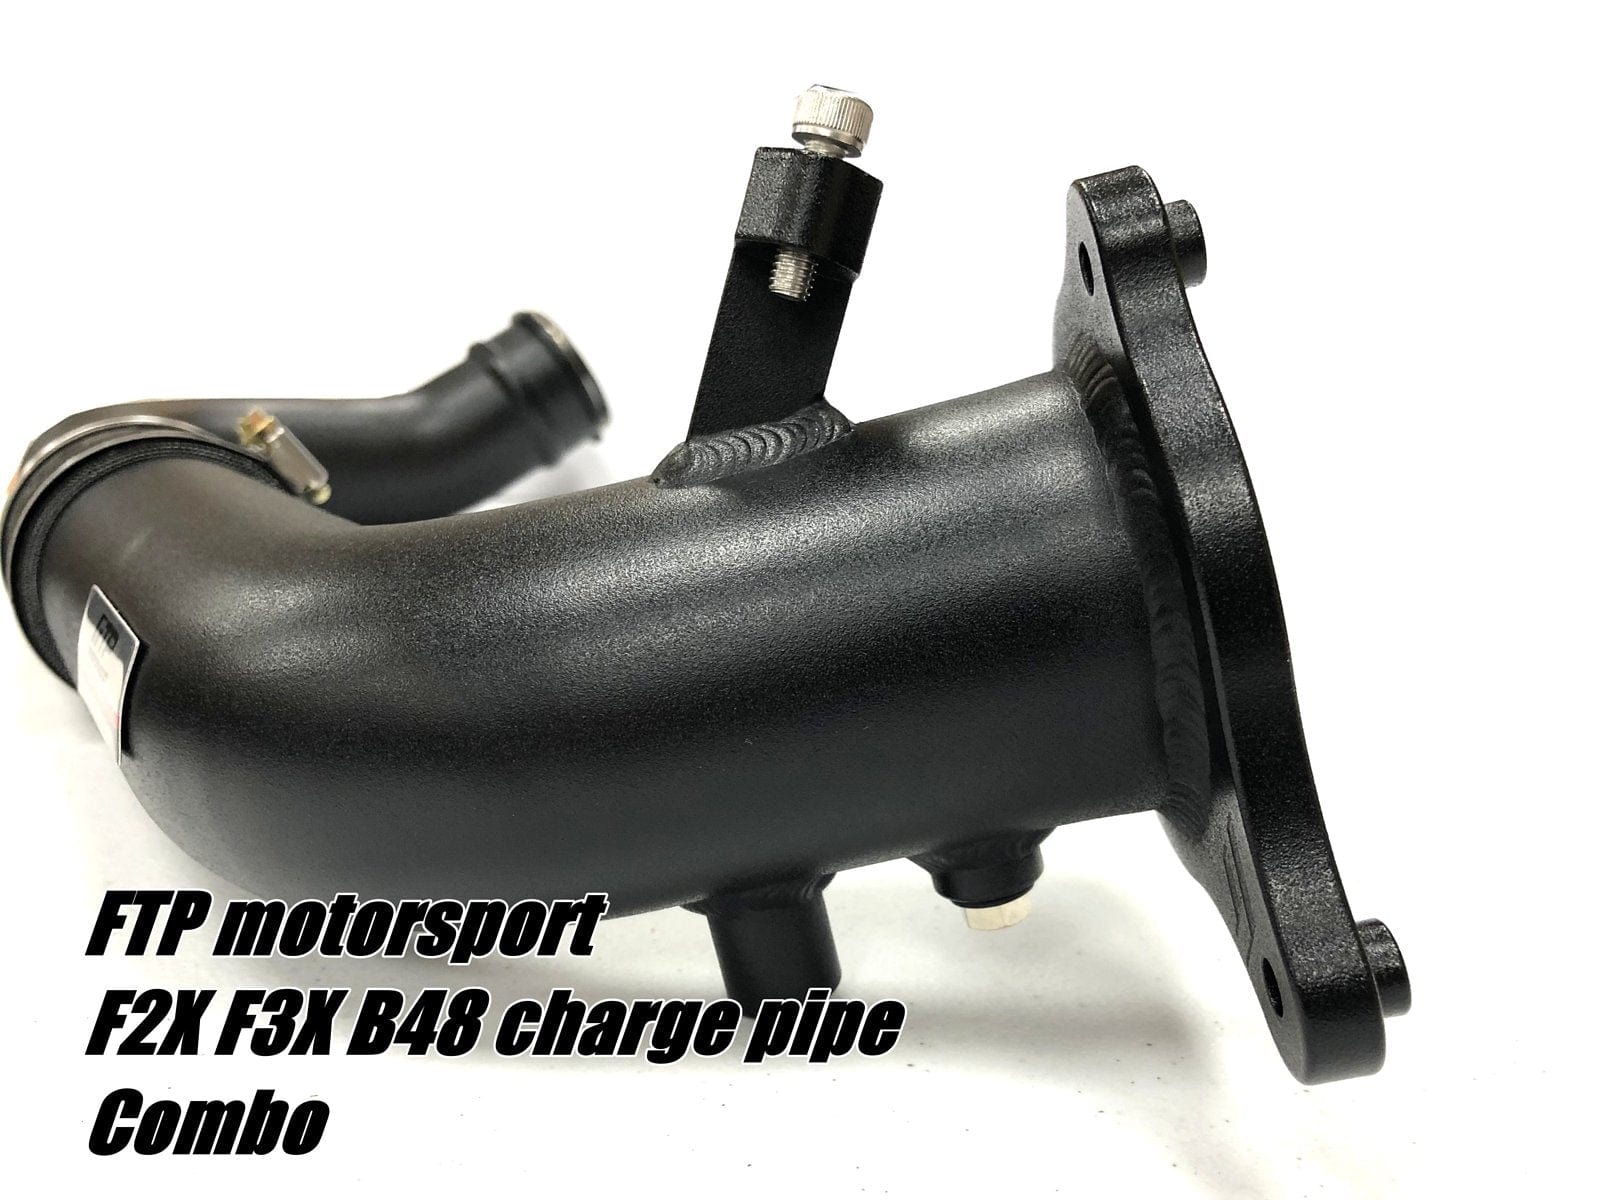 Kies-Motorsports FTP Motorsport FTP F2X F3X B48 CHARGE PIPE COMBO V2 ( CHARGE PIPE+ INTAKE PIPE)